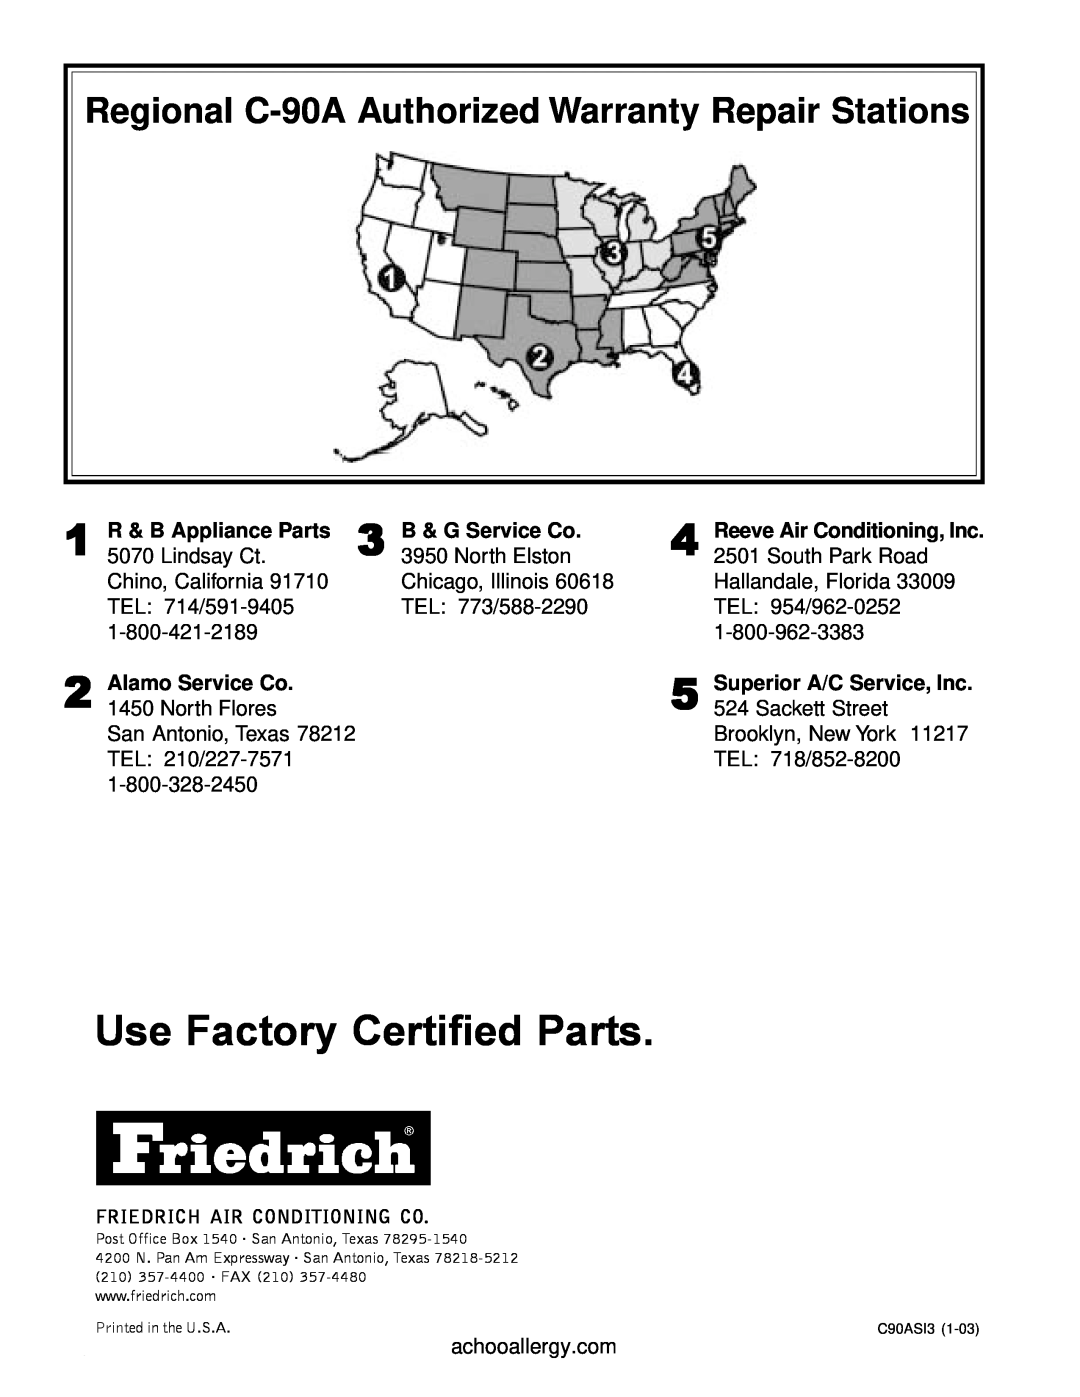 Friedrich manual Use Factory Certified Parts, Regional C-90AAuthorized Warranty Repair Stations, R & B Appliance Parts 